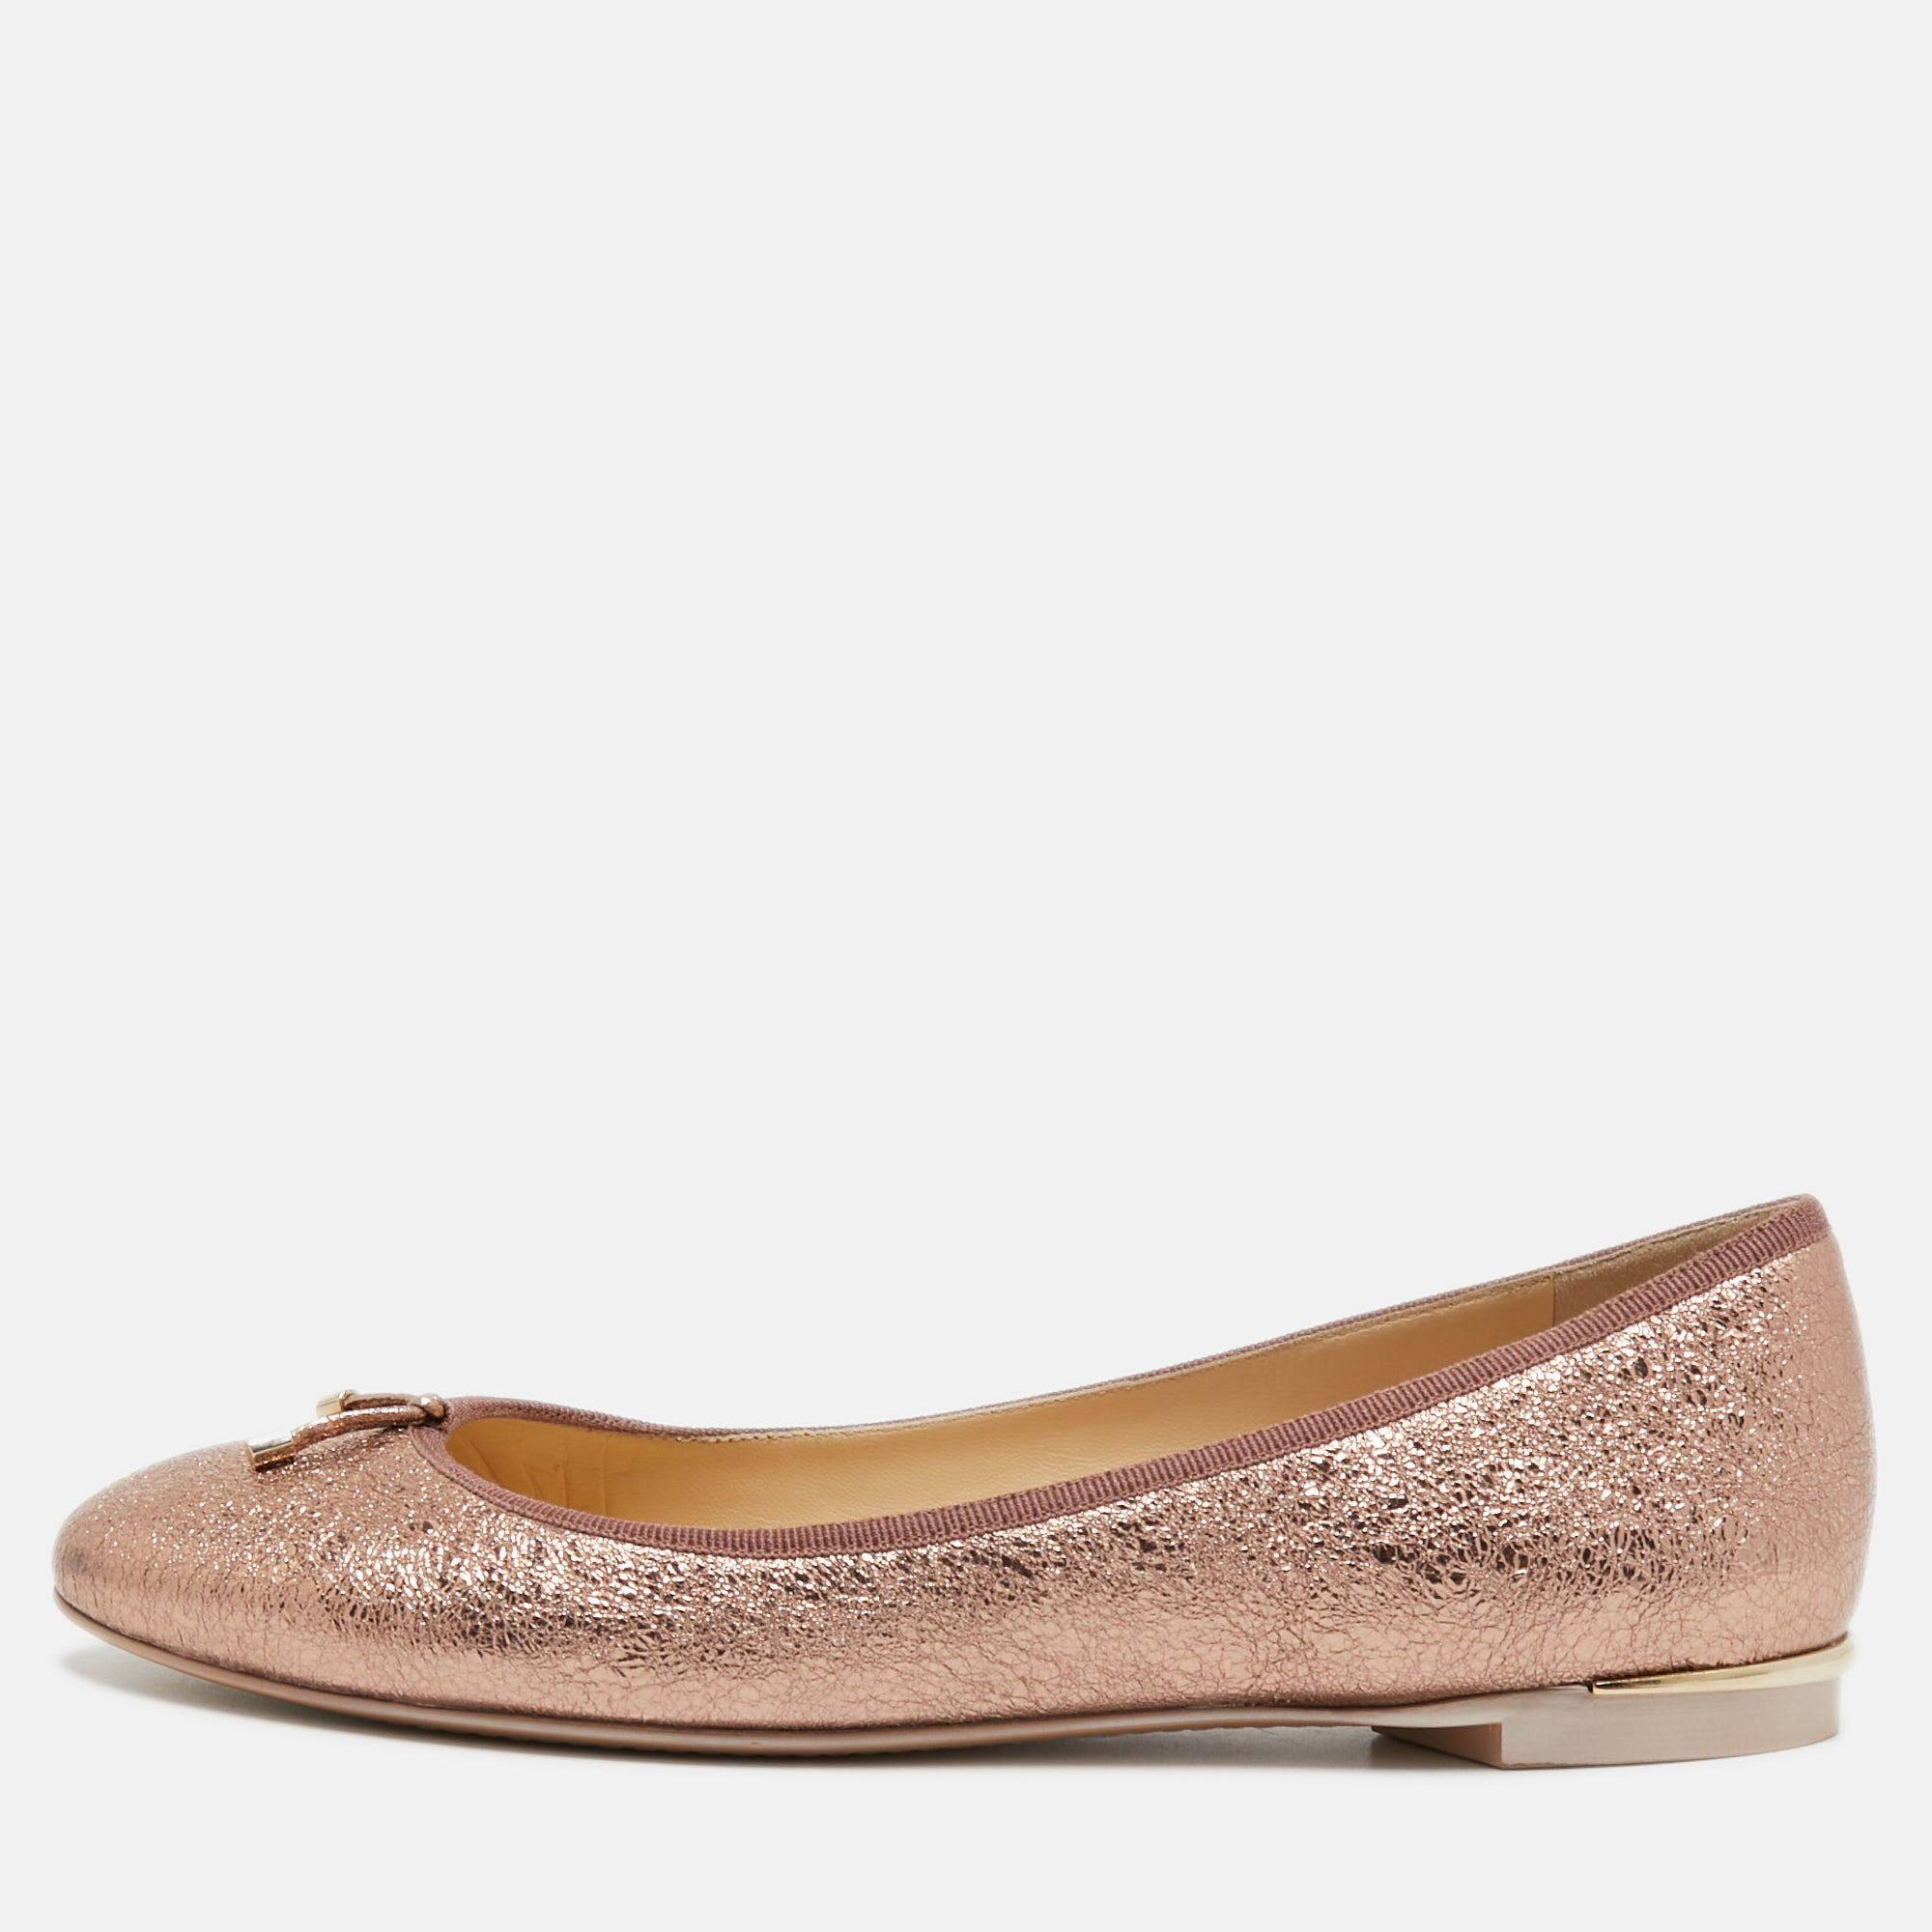 Pre-owned Jimmy Choo Metallic Pink Leather Ballet Flats Size 38.5